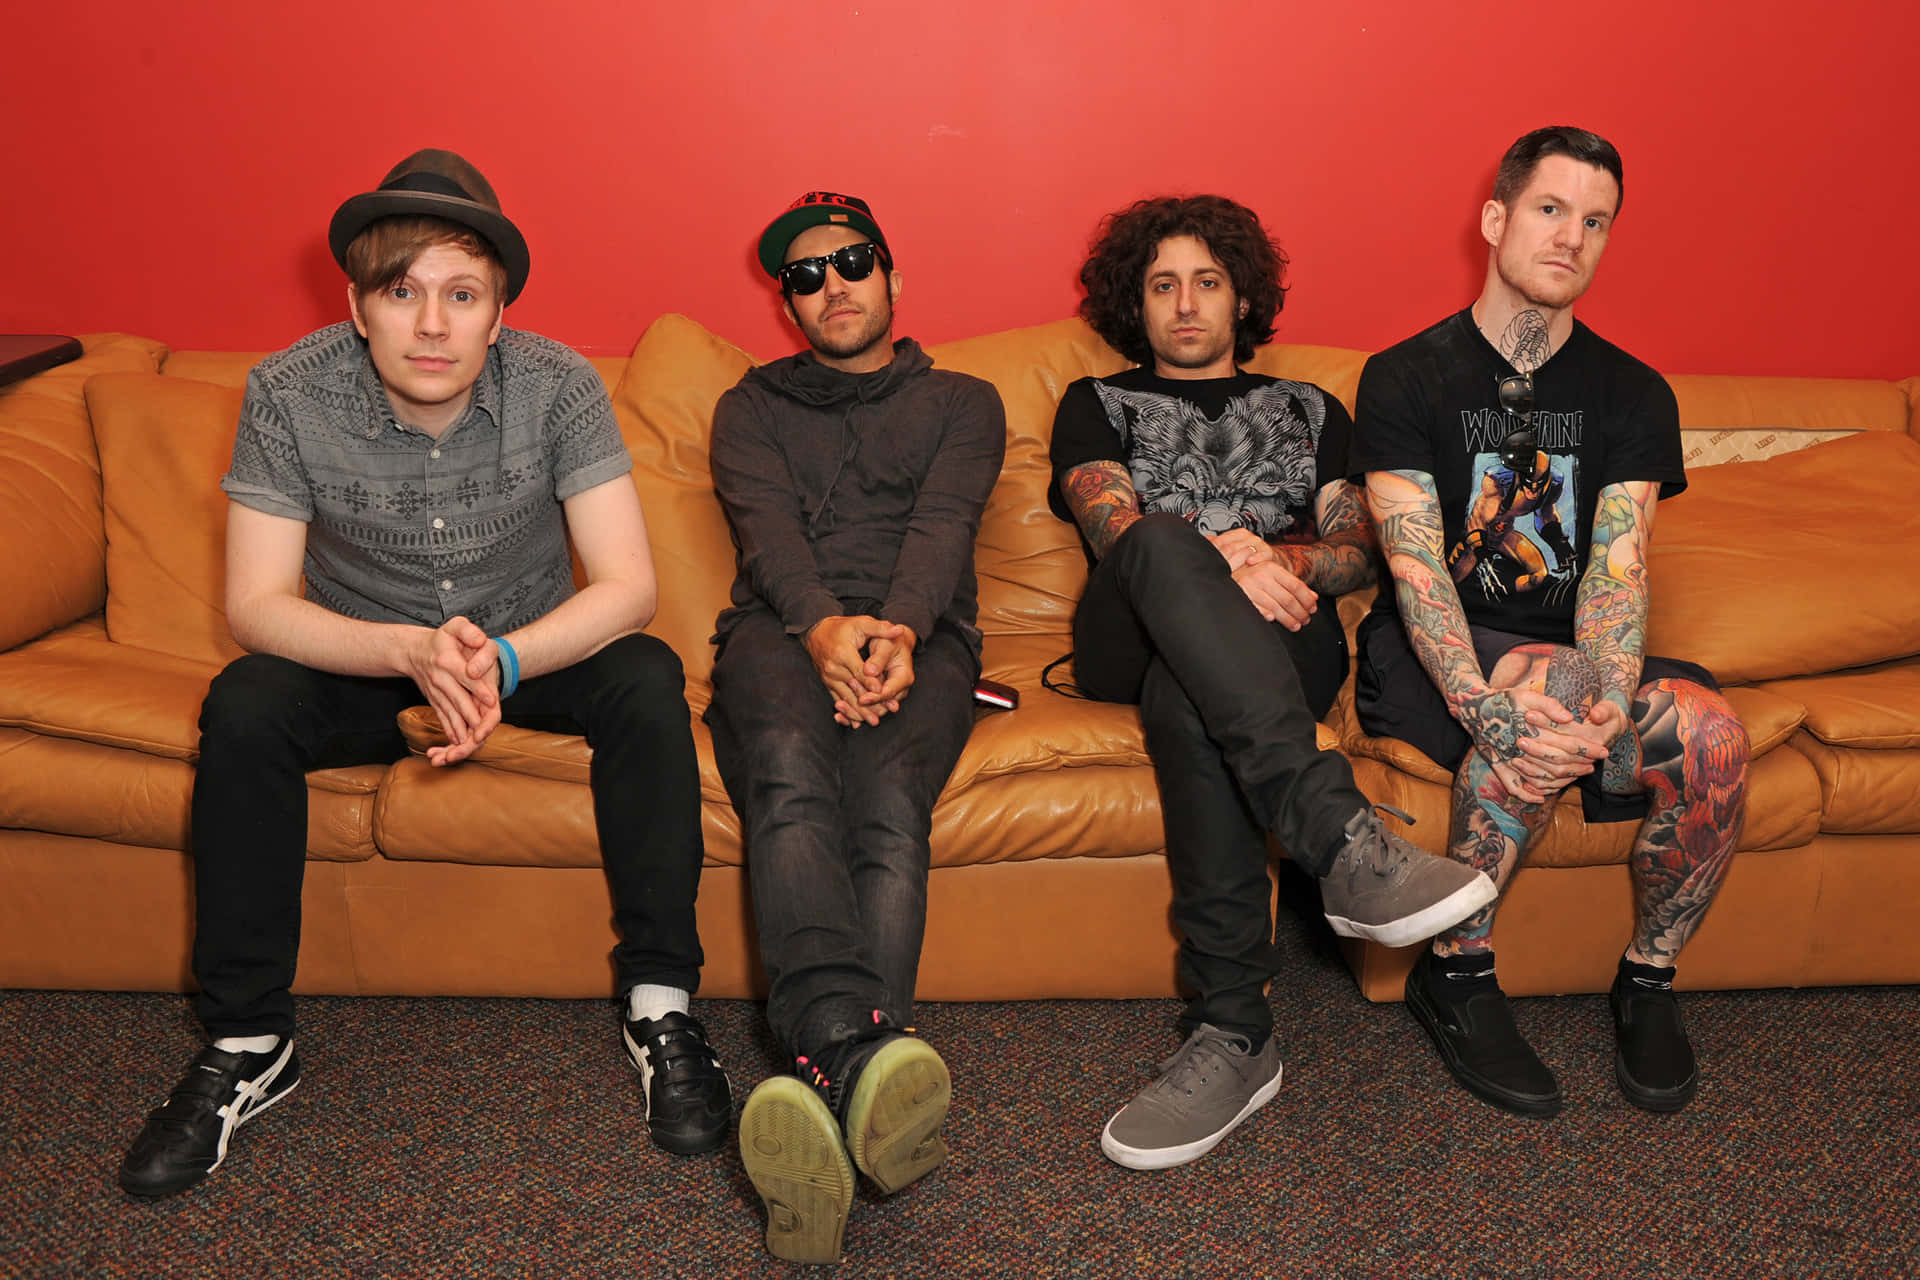 Feel the Euphoria with Fall Out Boy Wallpaper